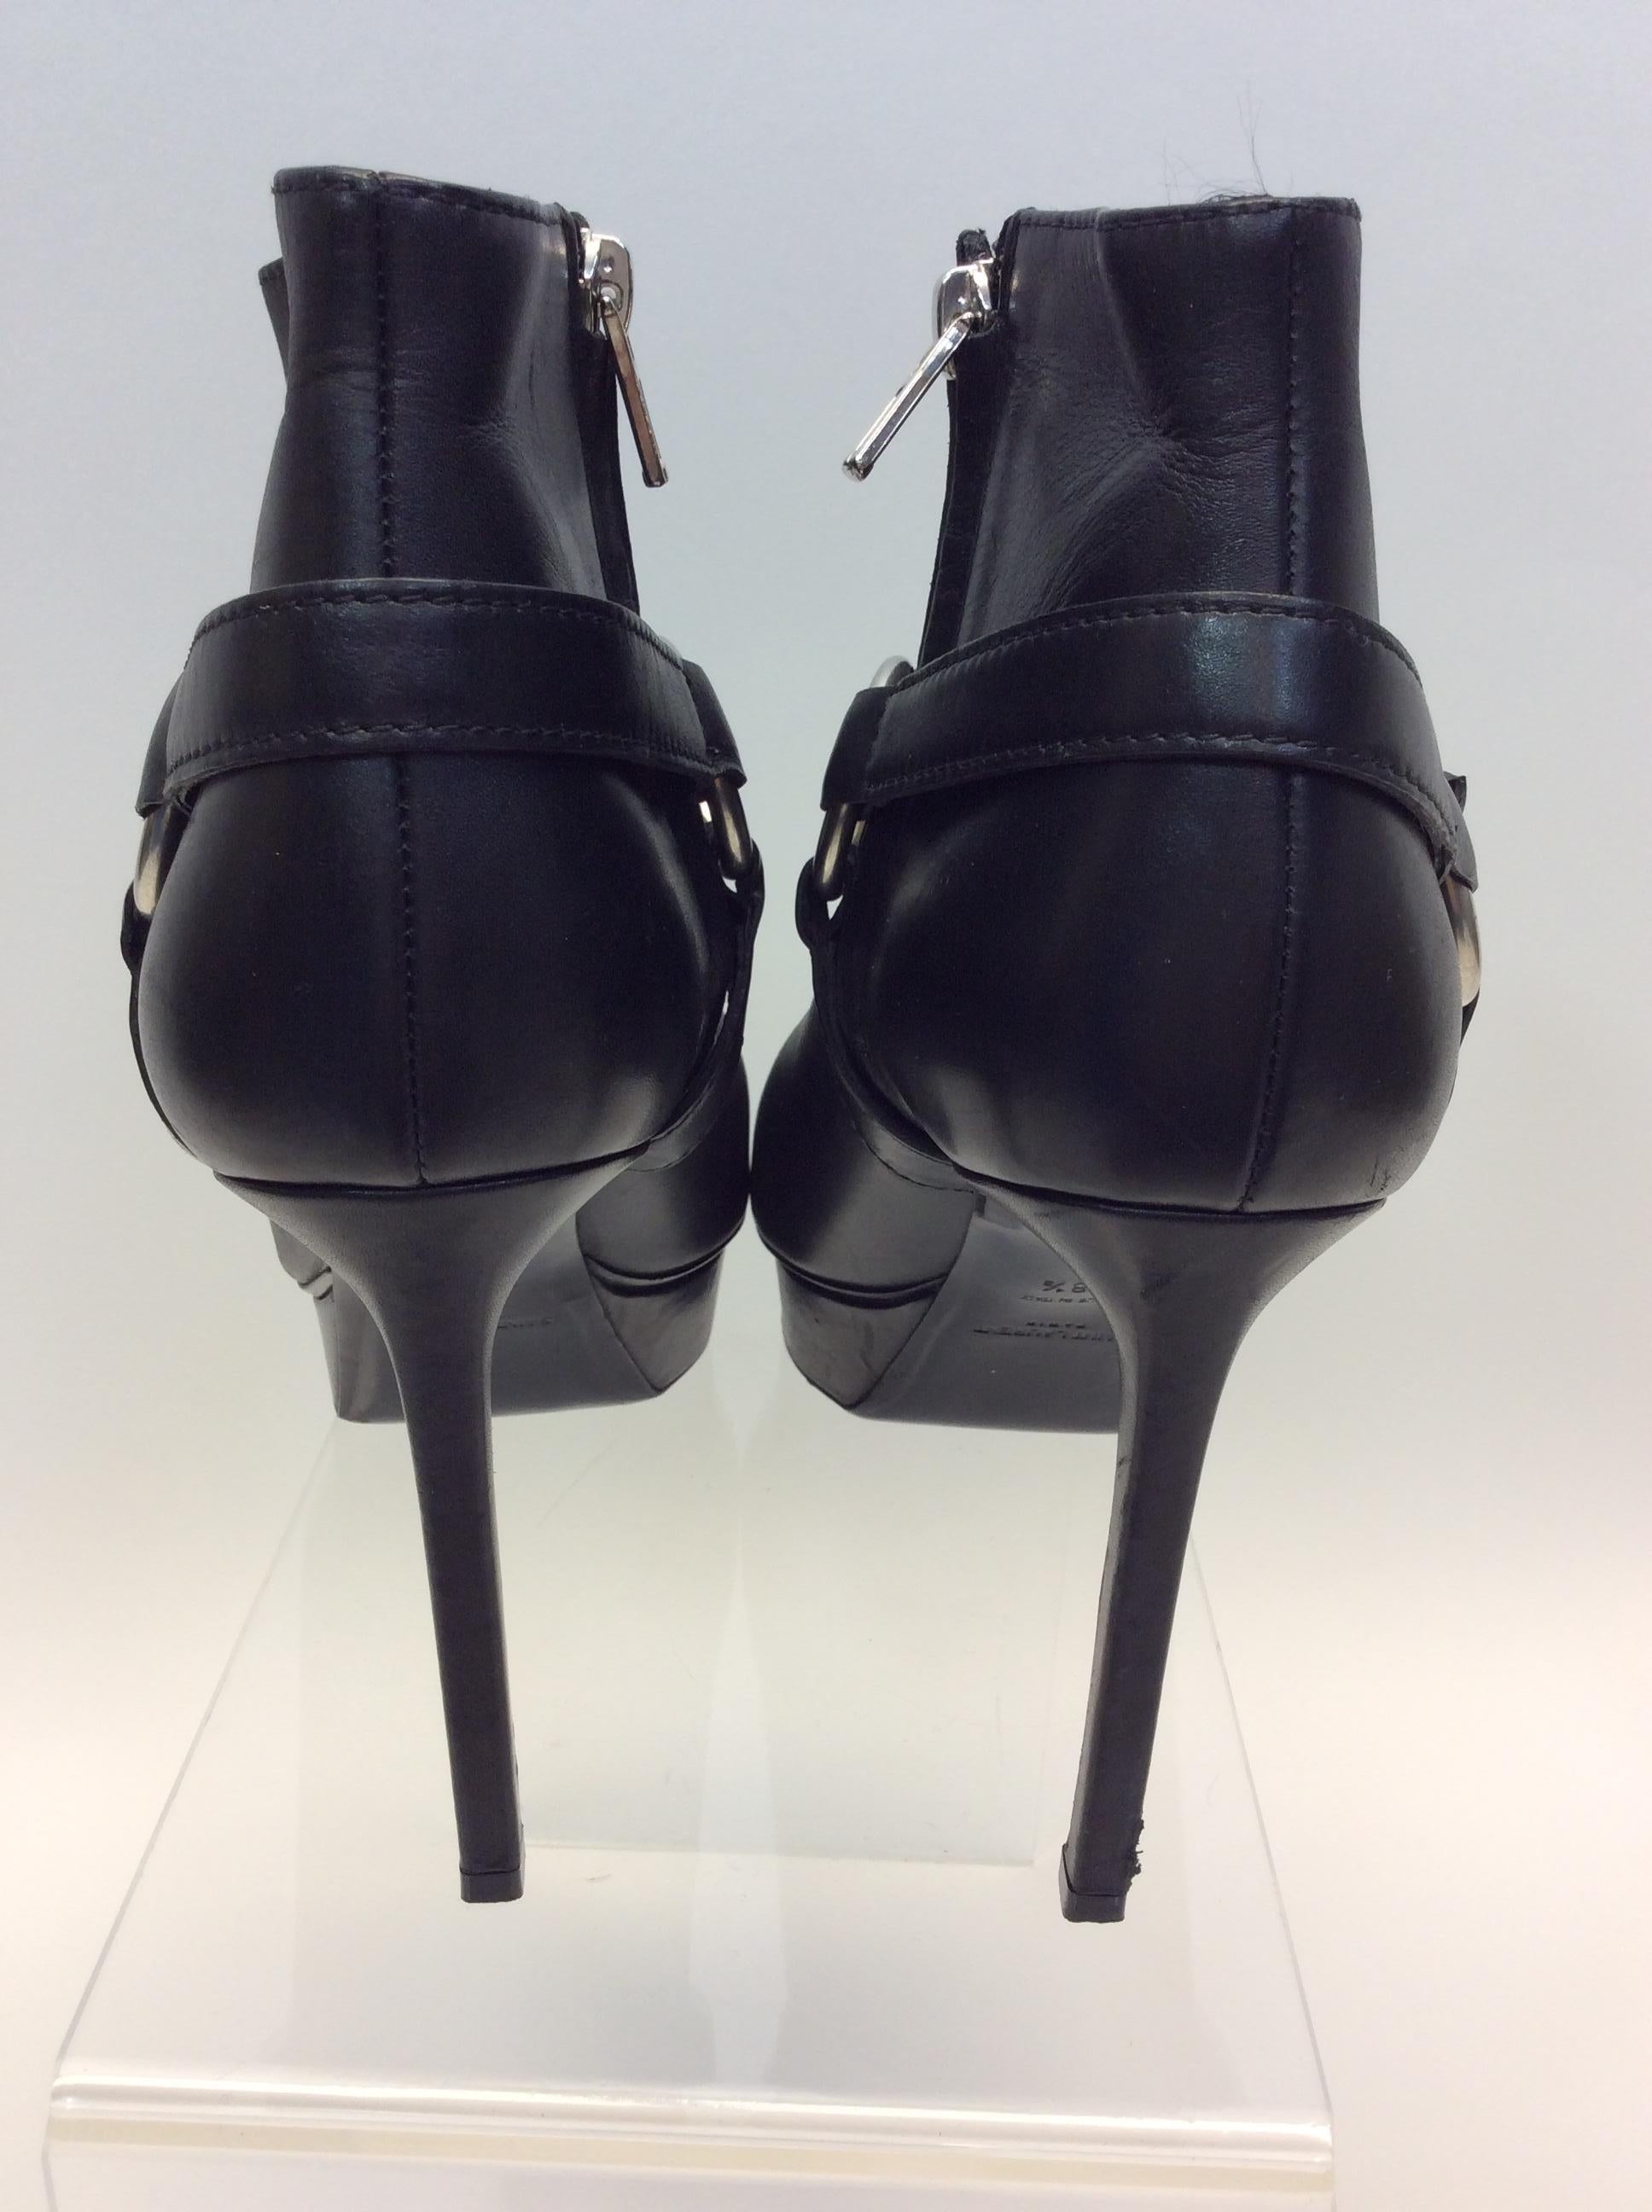 Saint Laurent Black Leather Bootie In Excellent Condition For Sale In Narberth, PA